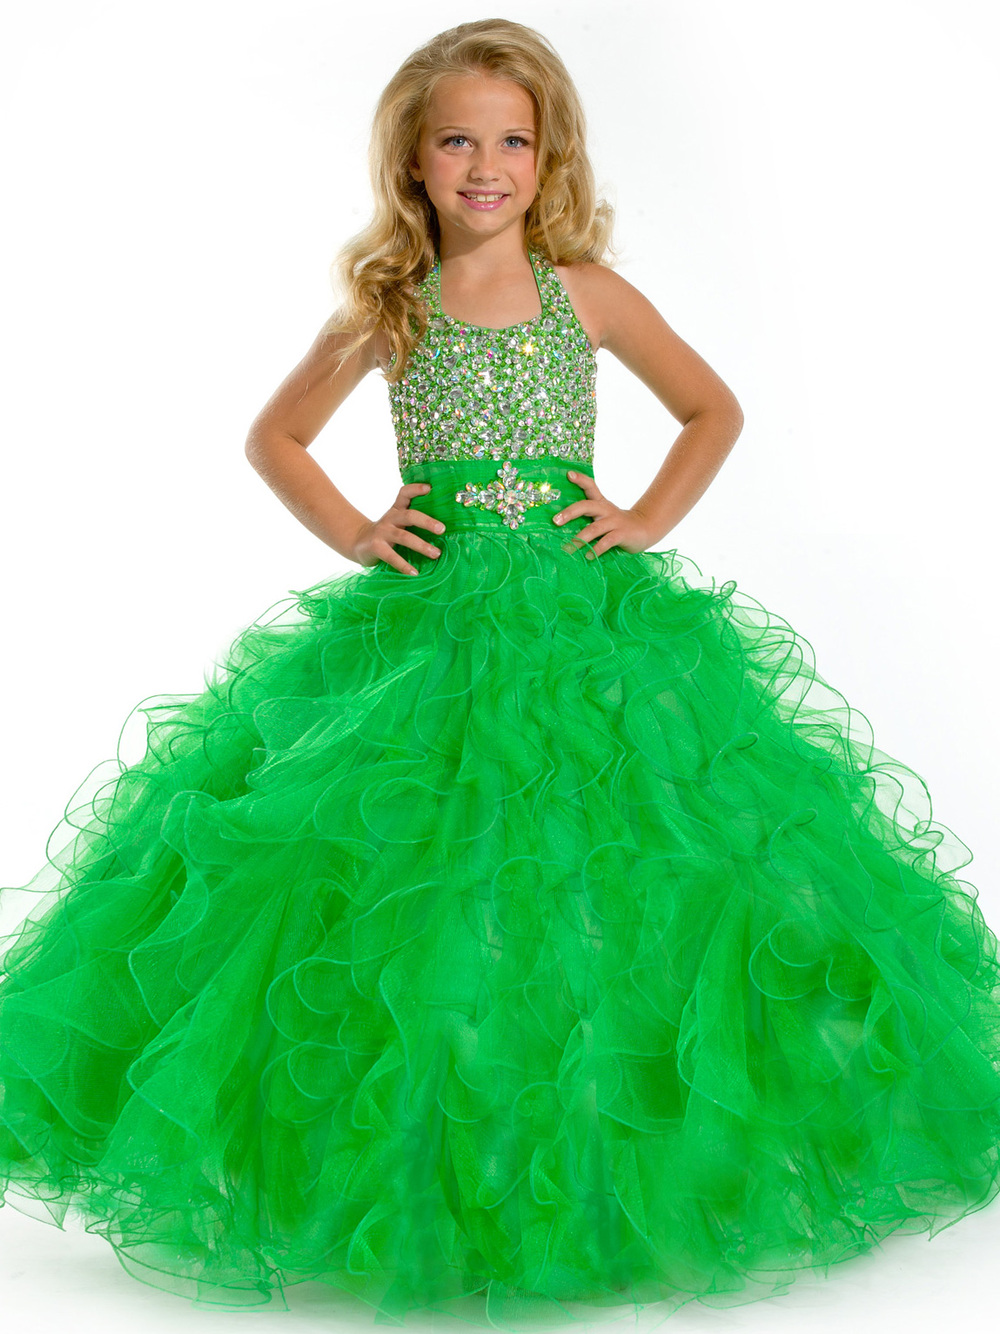 F16 2013 green halter beaded sequins Colorful luxuriant Organza Lovely Pageant Girl's Party Princess Flower Girl Dresses Gowns